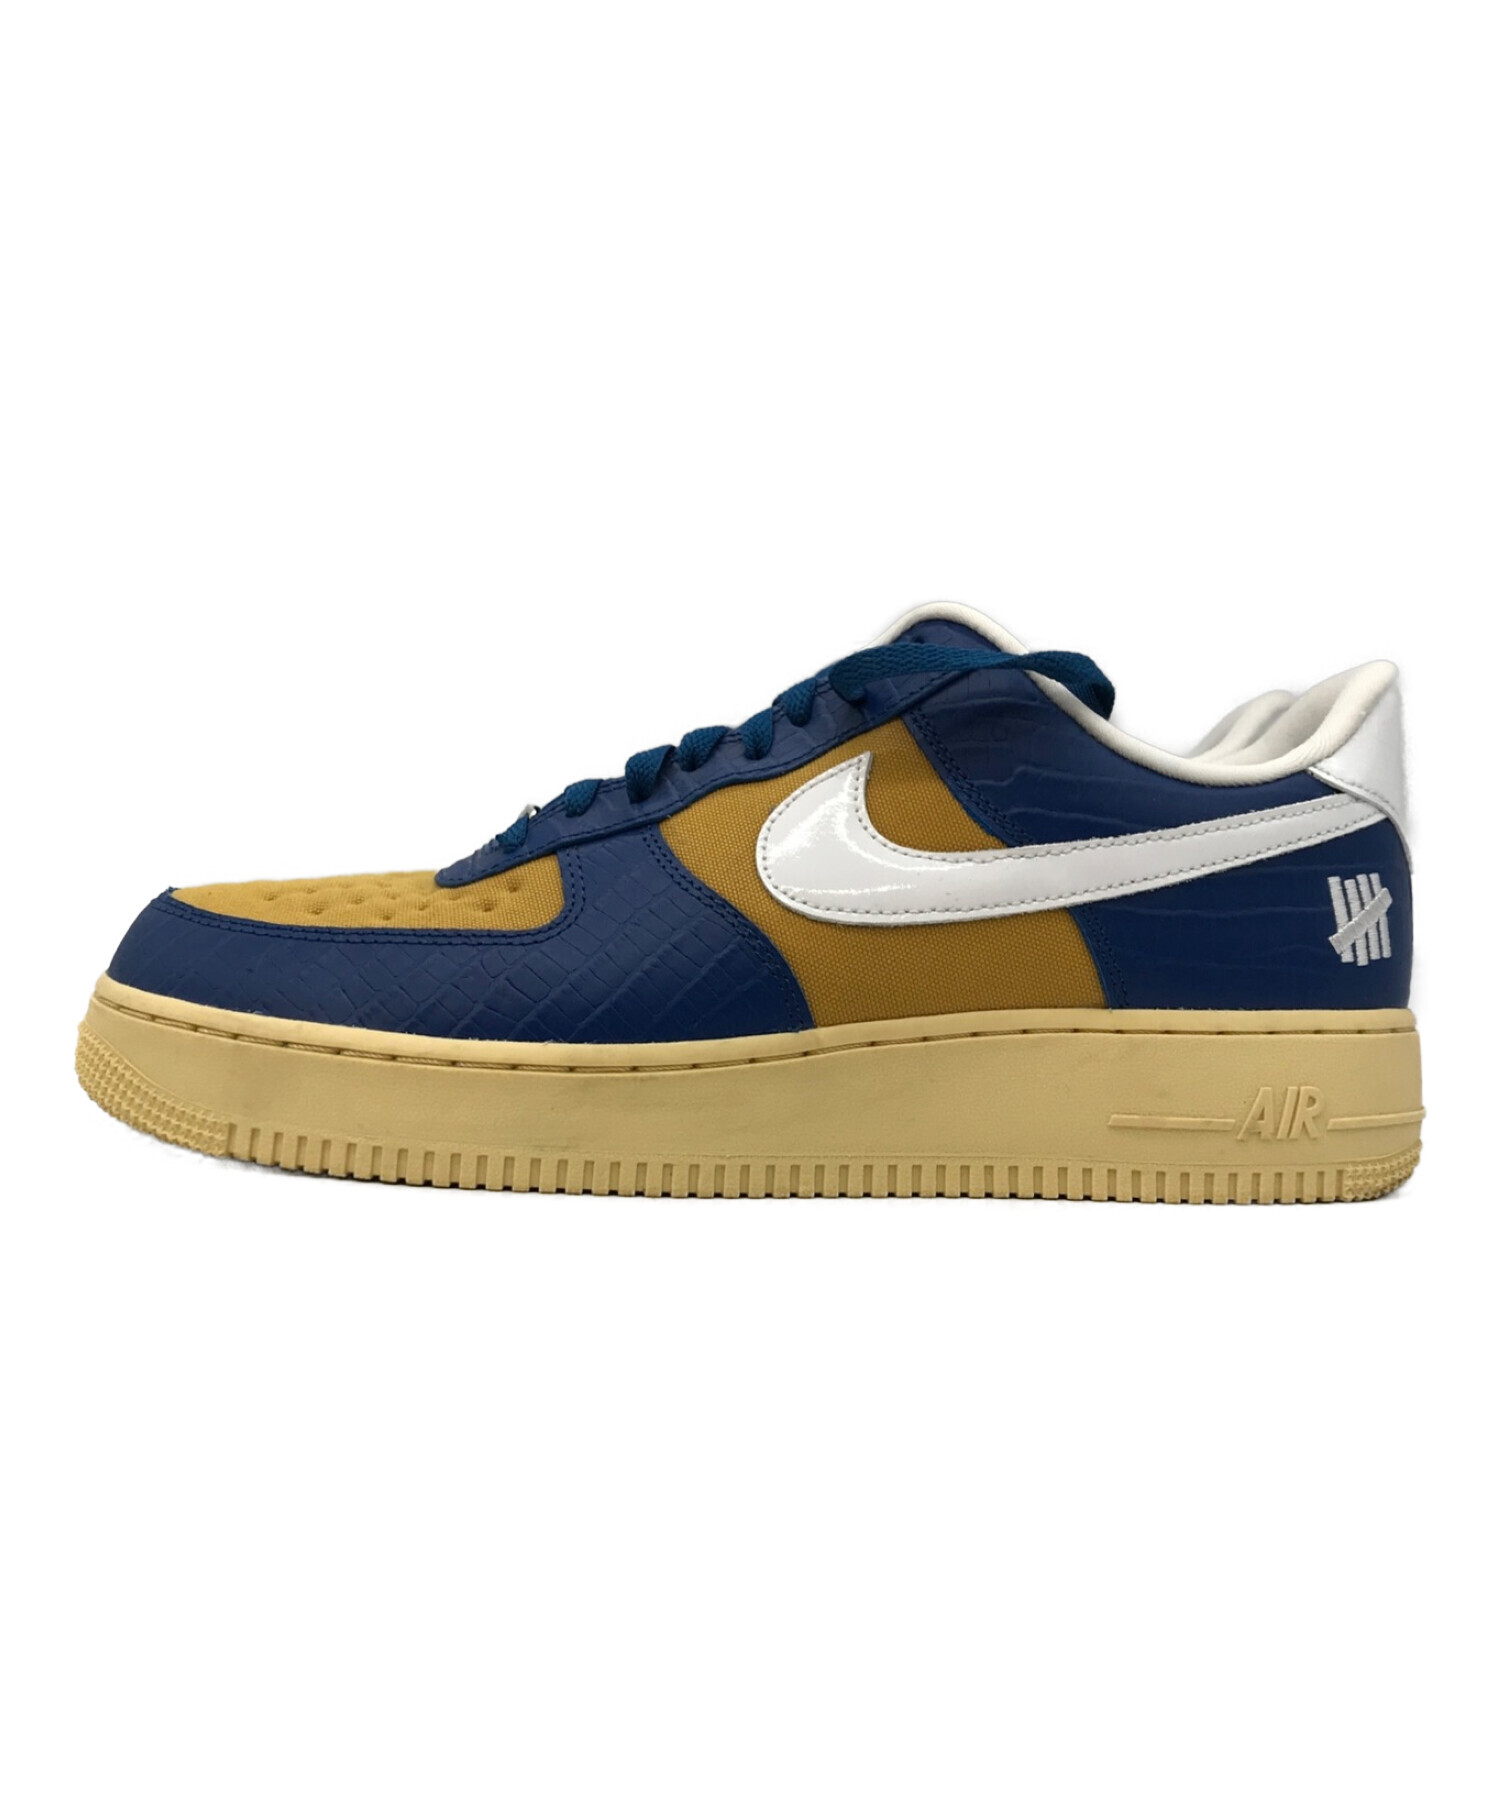 DUNK【新品】NIKE×UNDEFEATED AIR FORCE 1 LOW US11